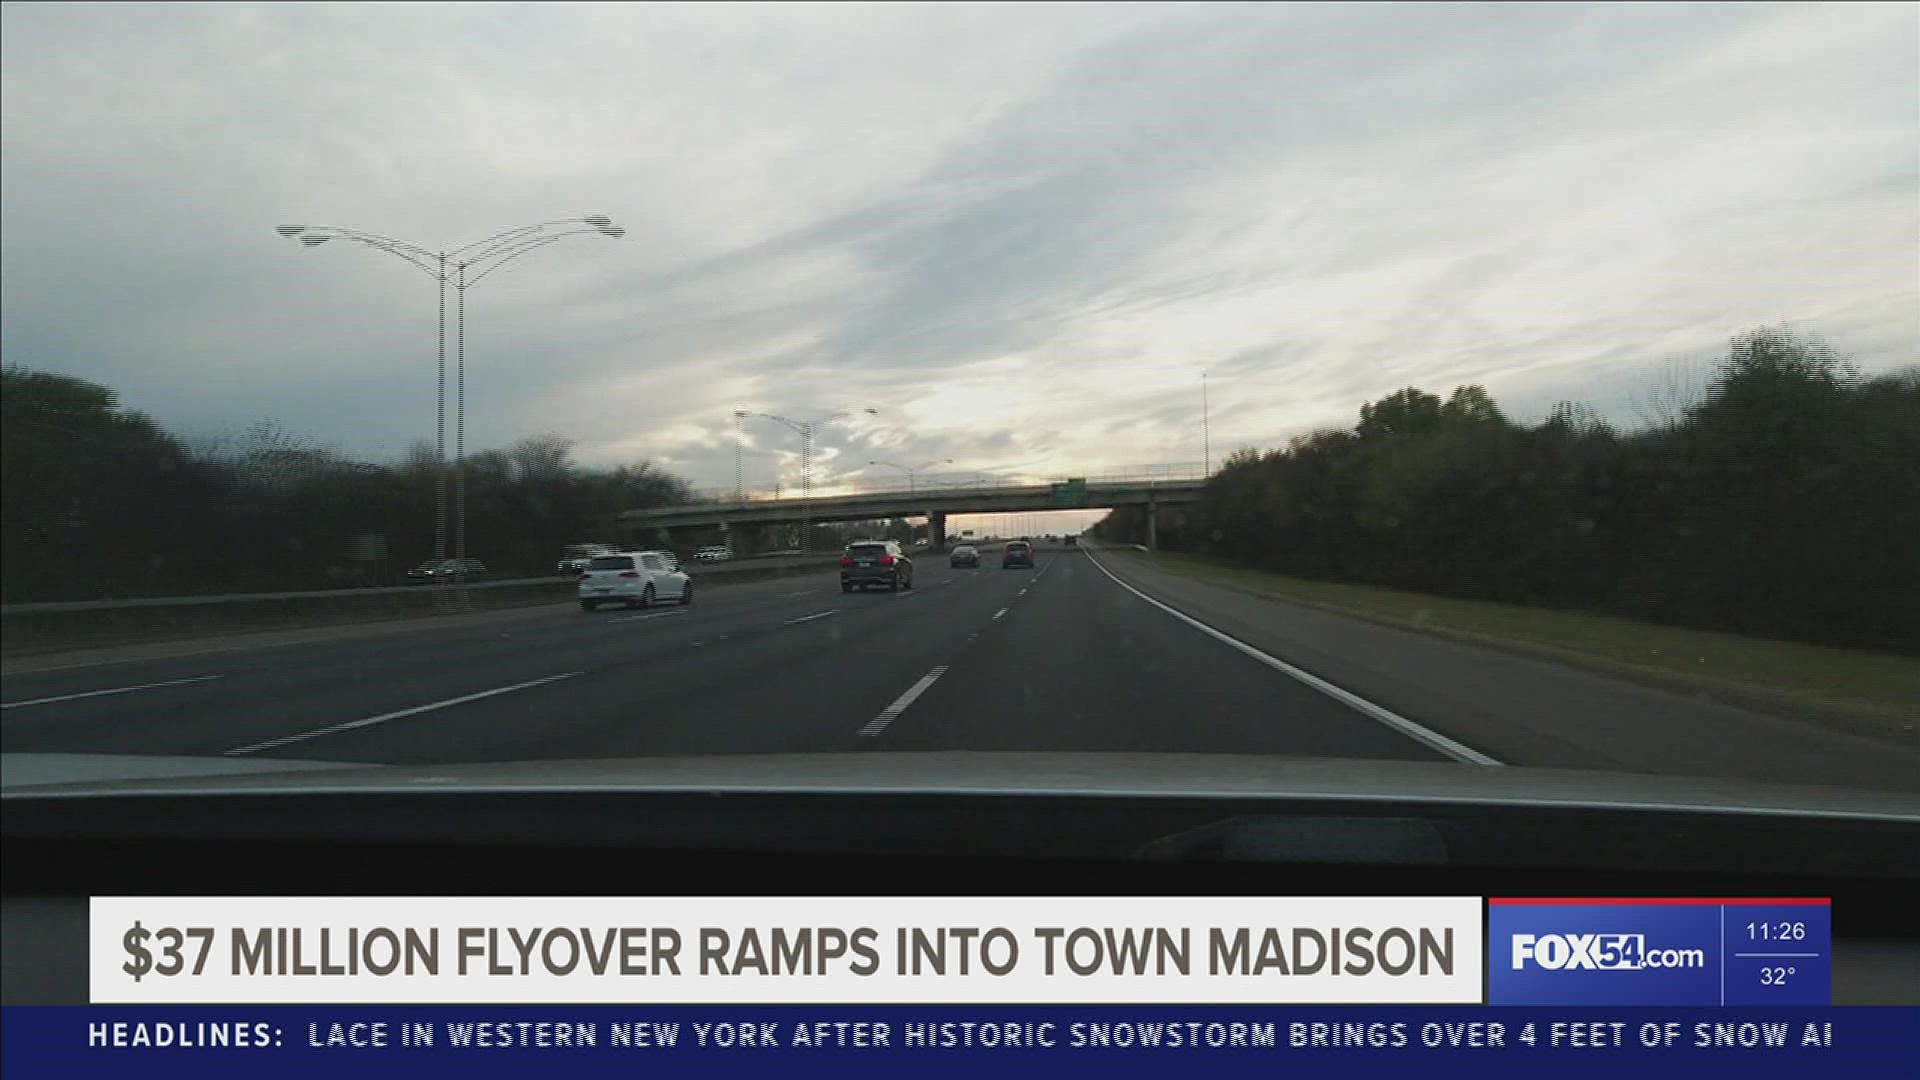 The City of Madison plans to begin construction on flyover ramps to help ease traffic in the area.